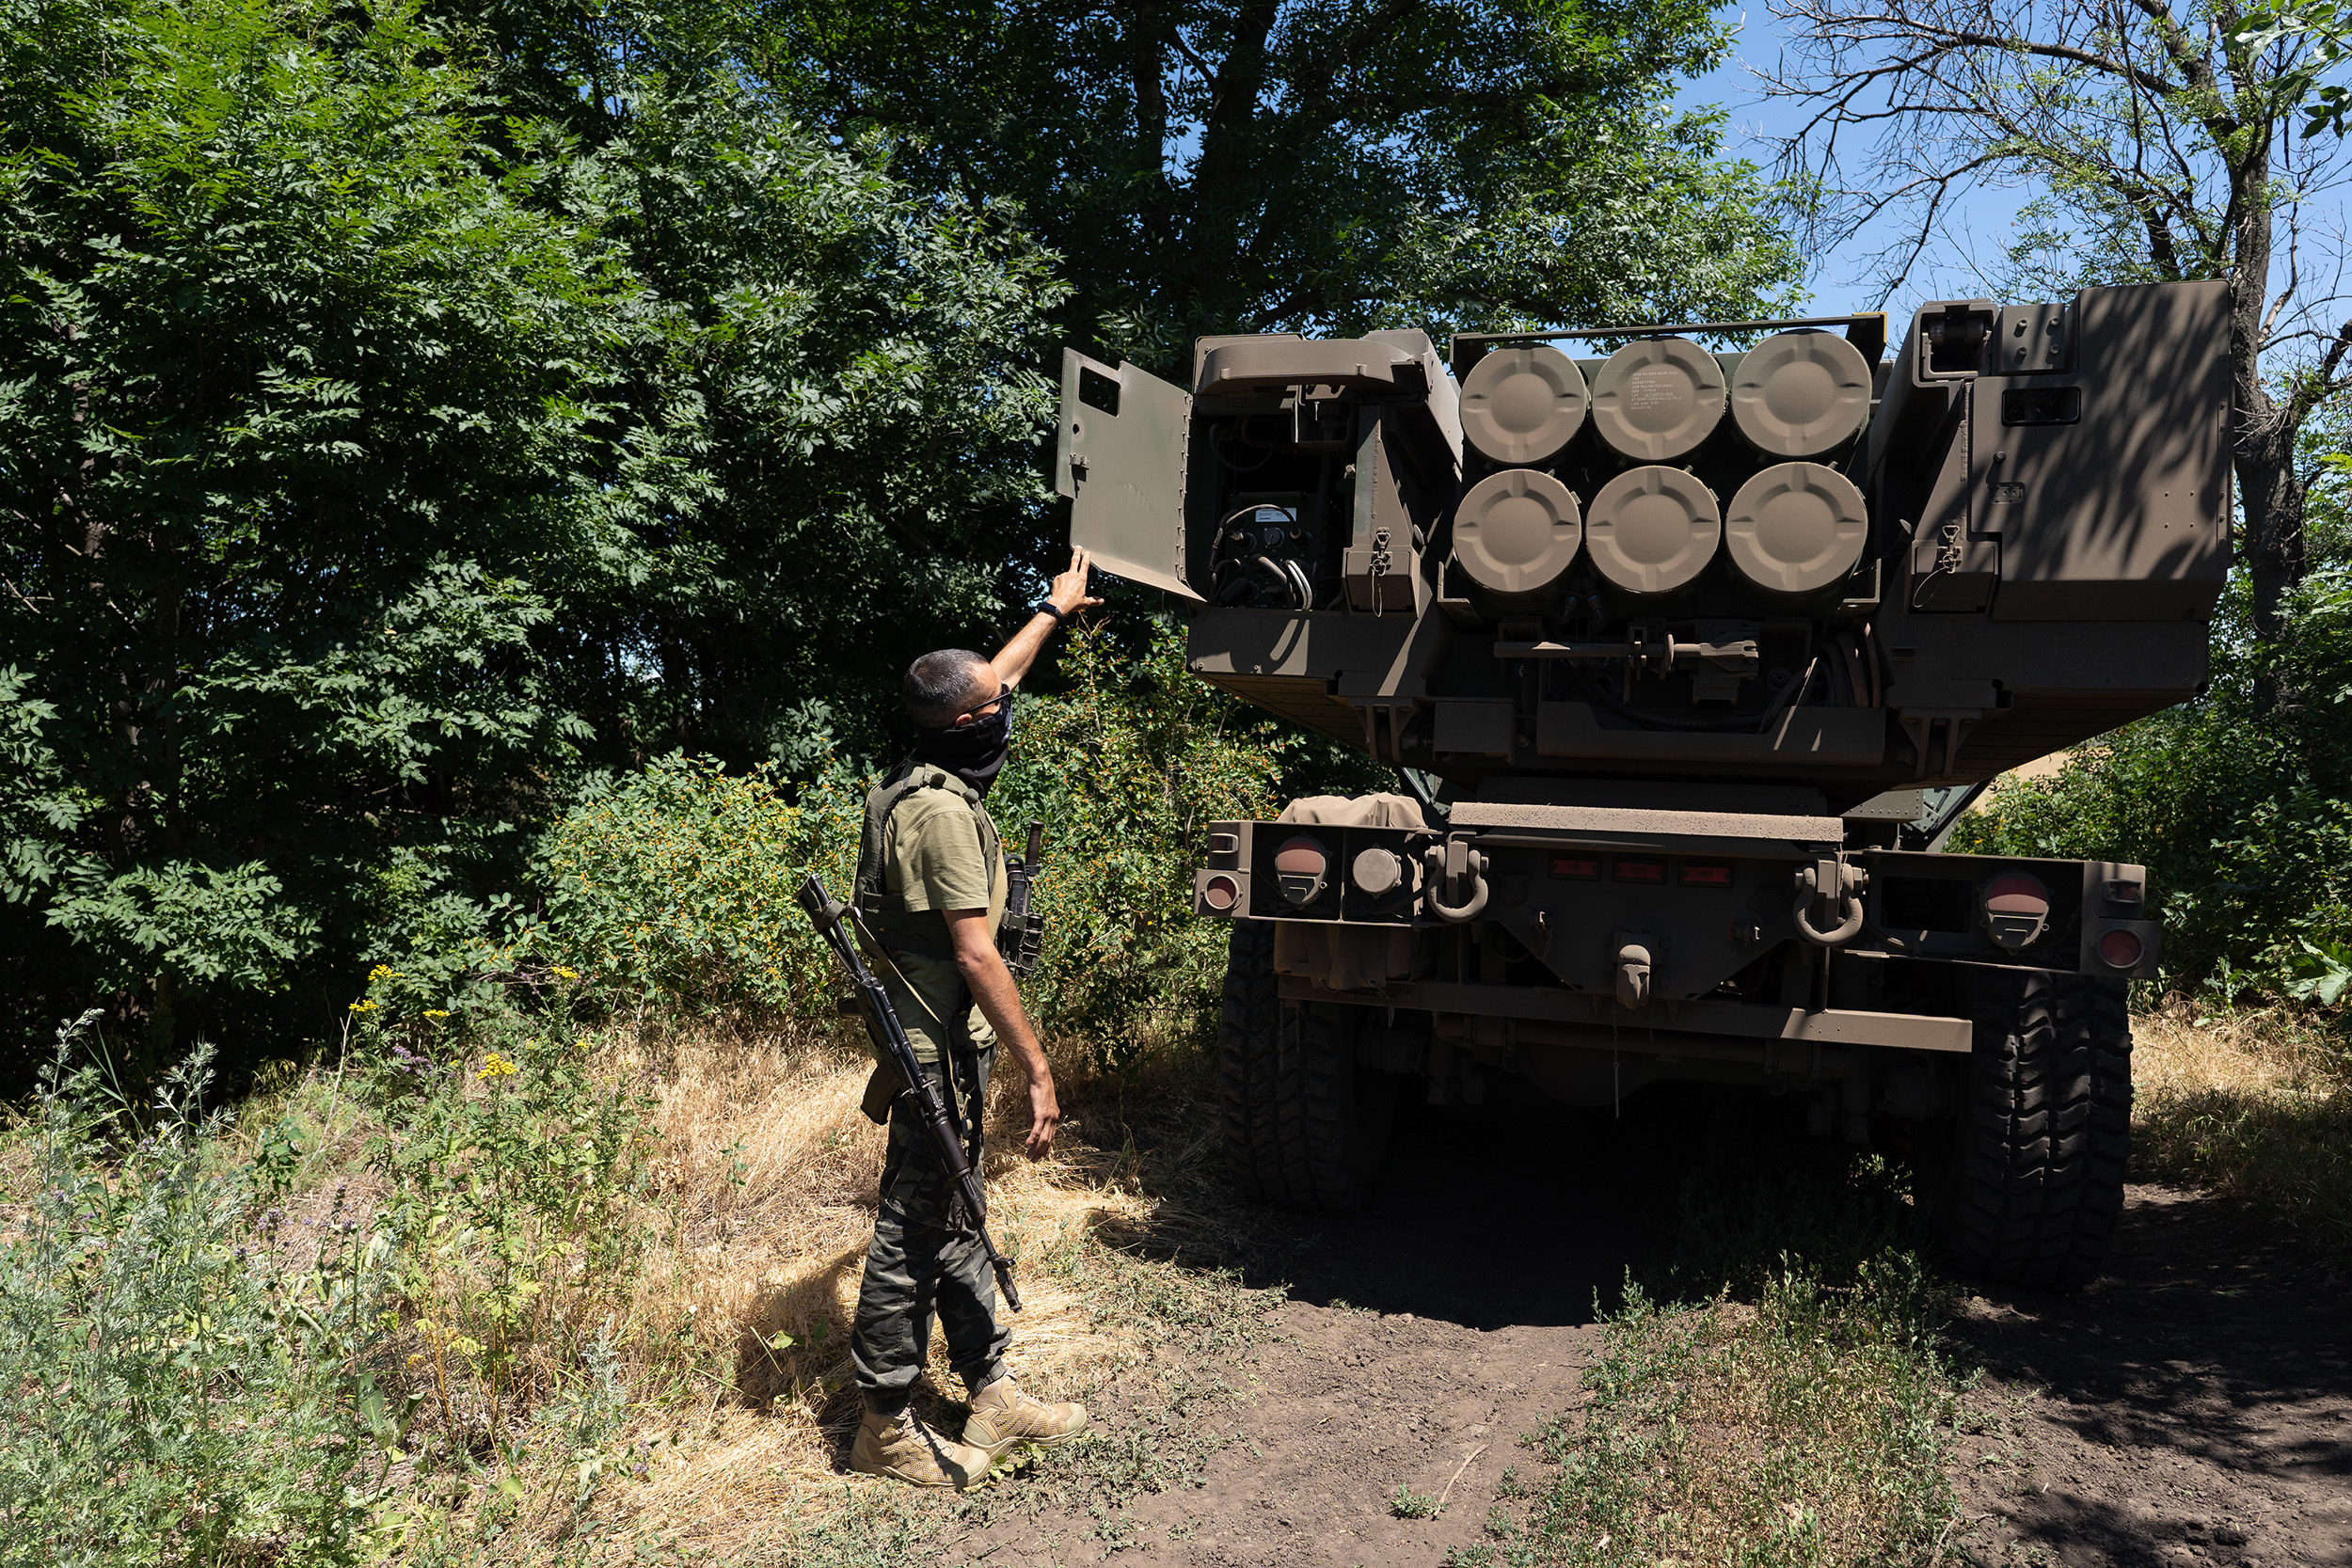 The commander of the unit shows the rockets on a HIMARS vehicle in Ukraine on July 1.